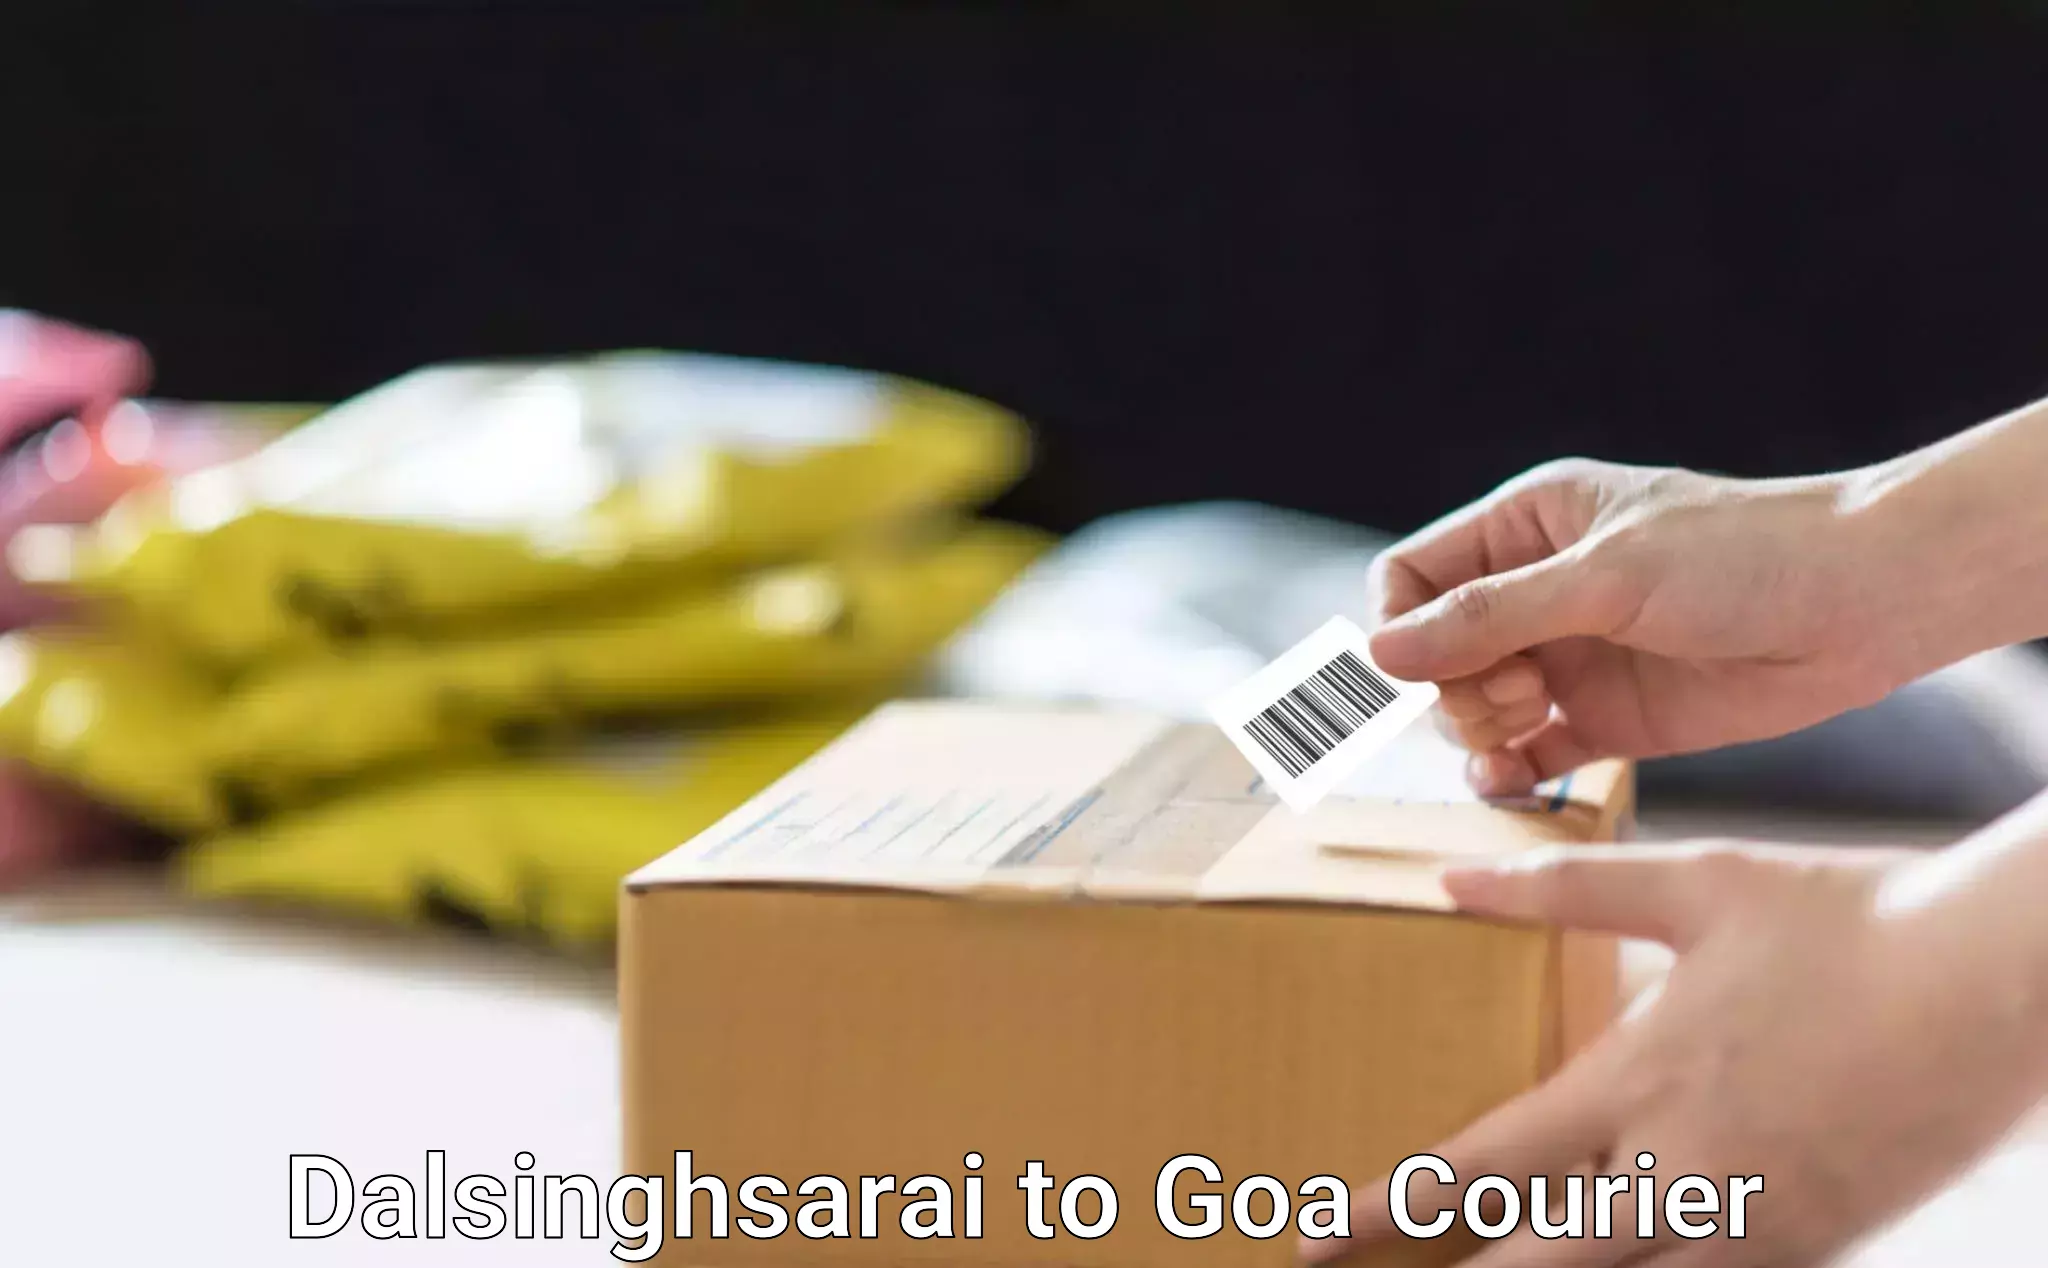 Moving and packing experts Dalsinghsarai to Goa University